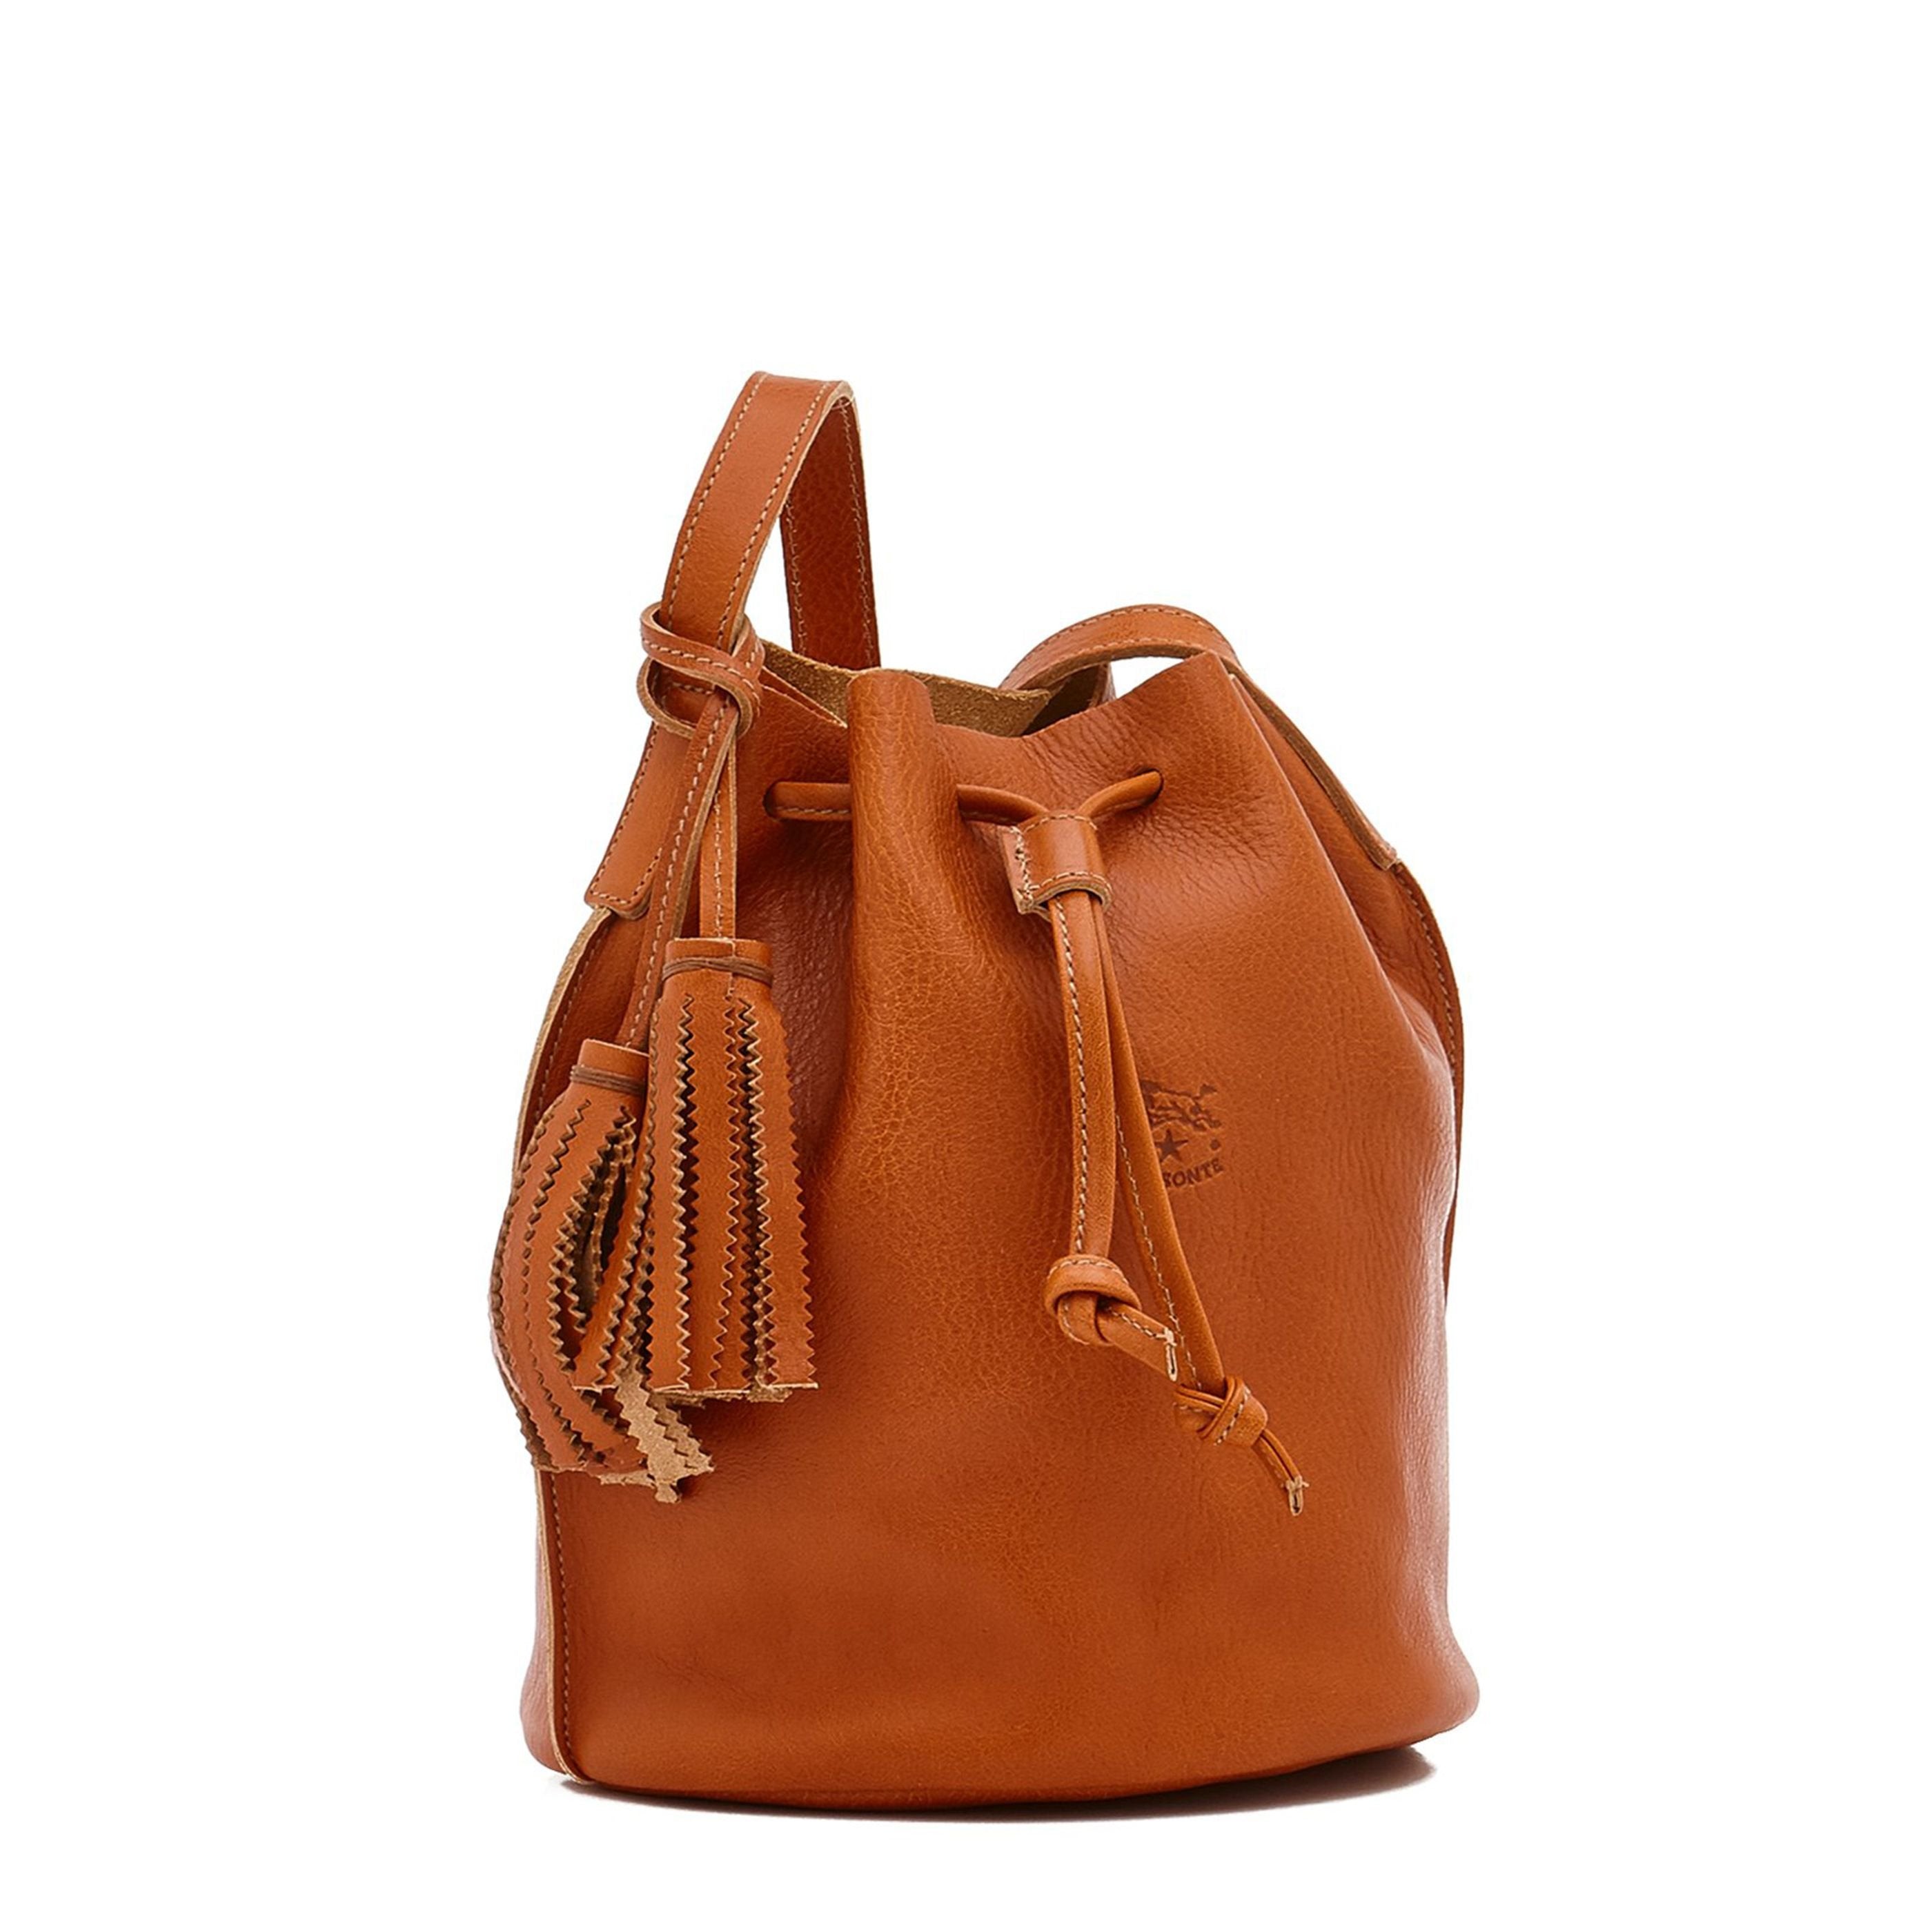 Silvia | Women's bucket bag in leather color caramel